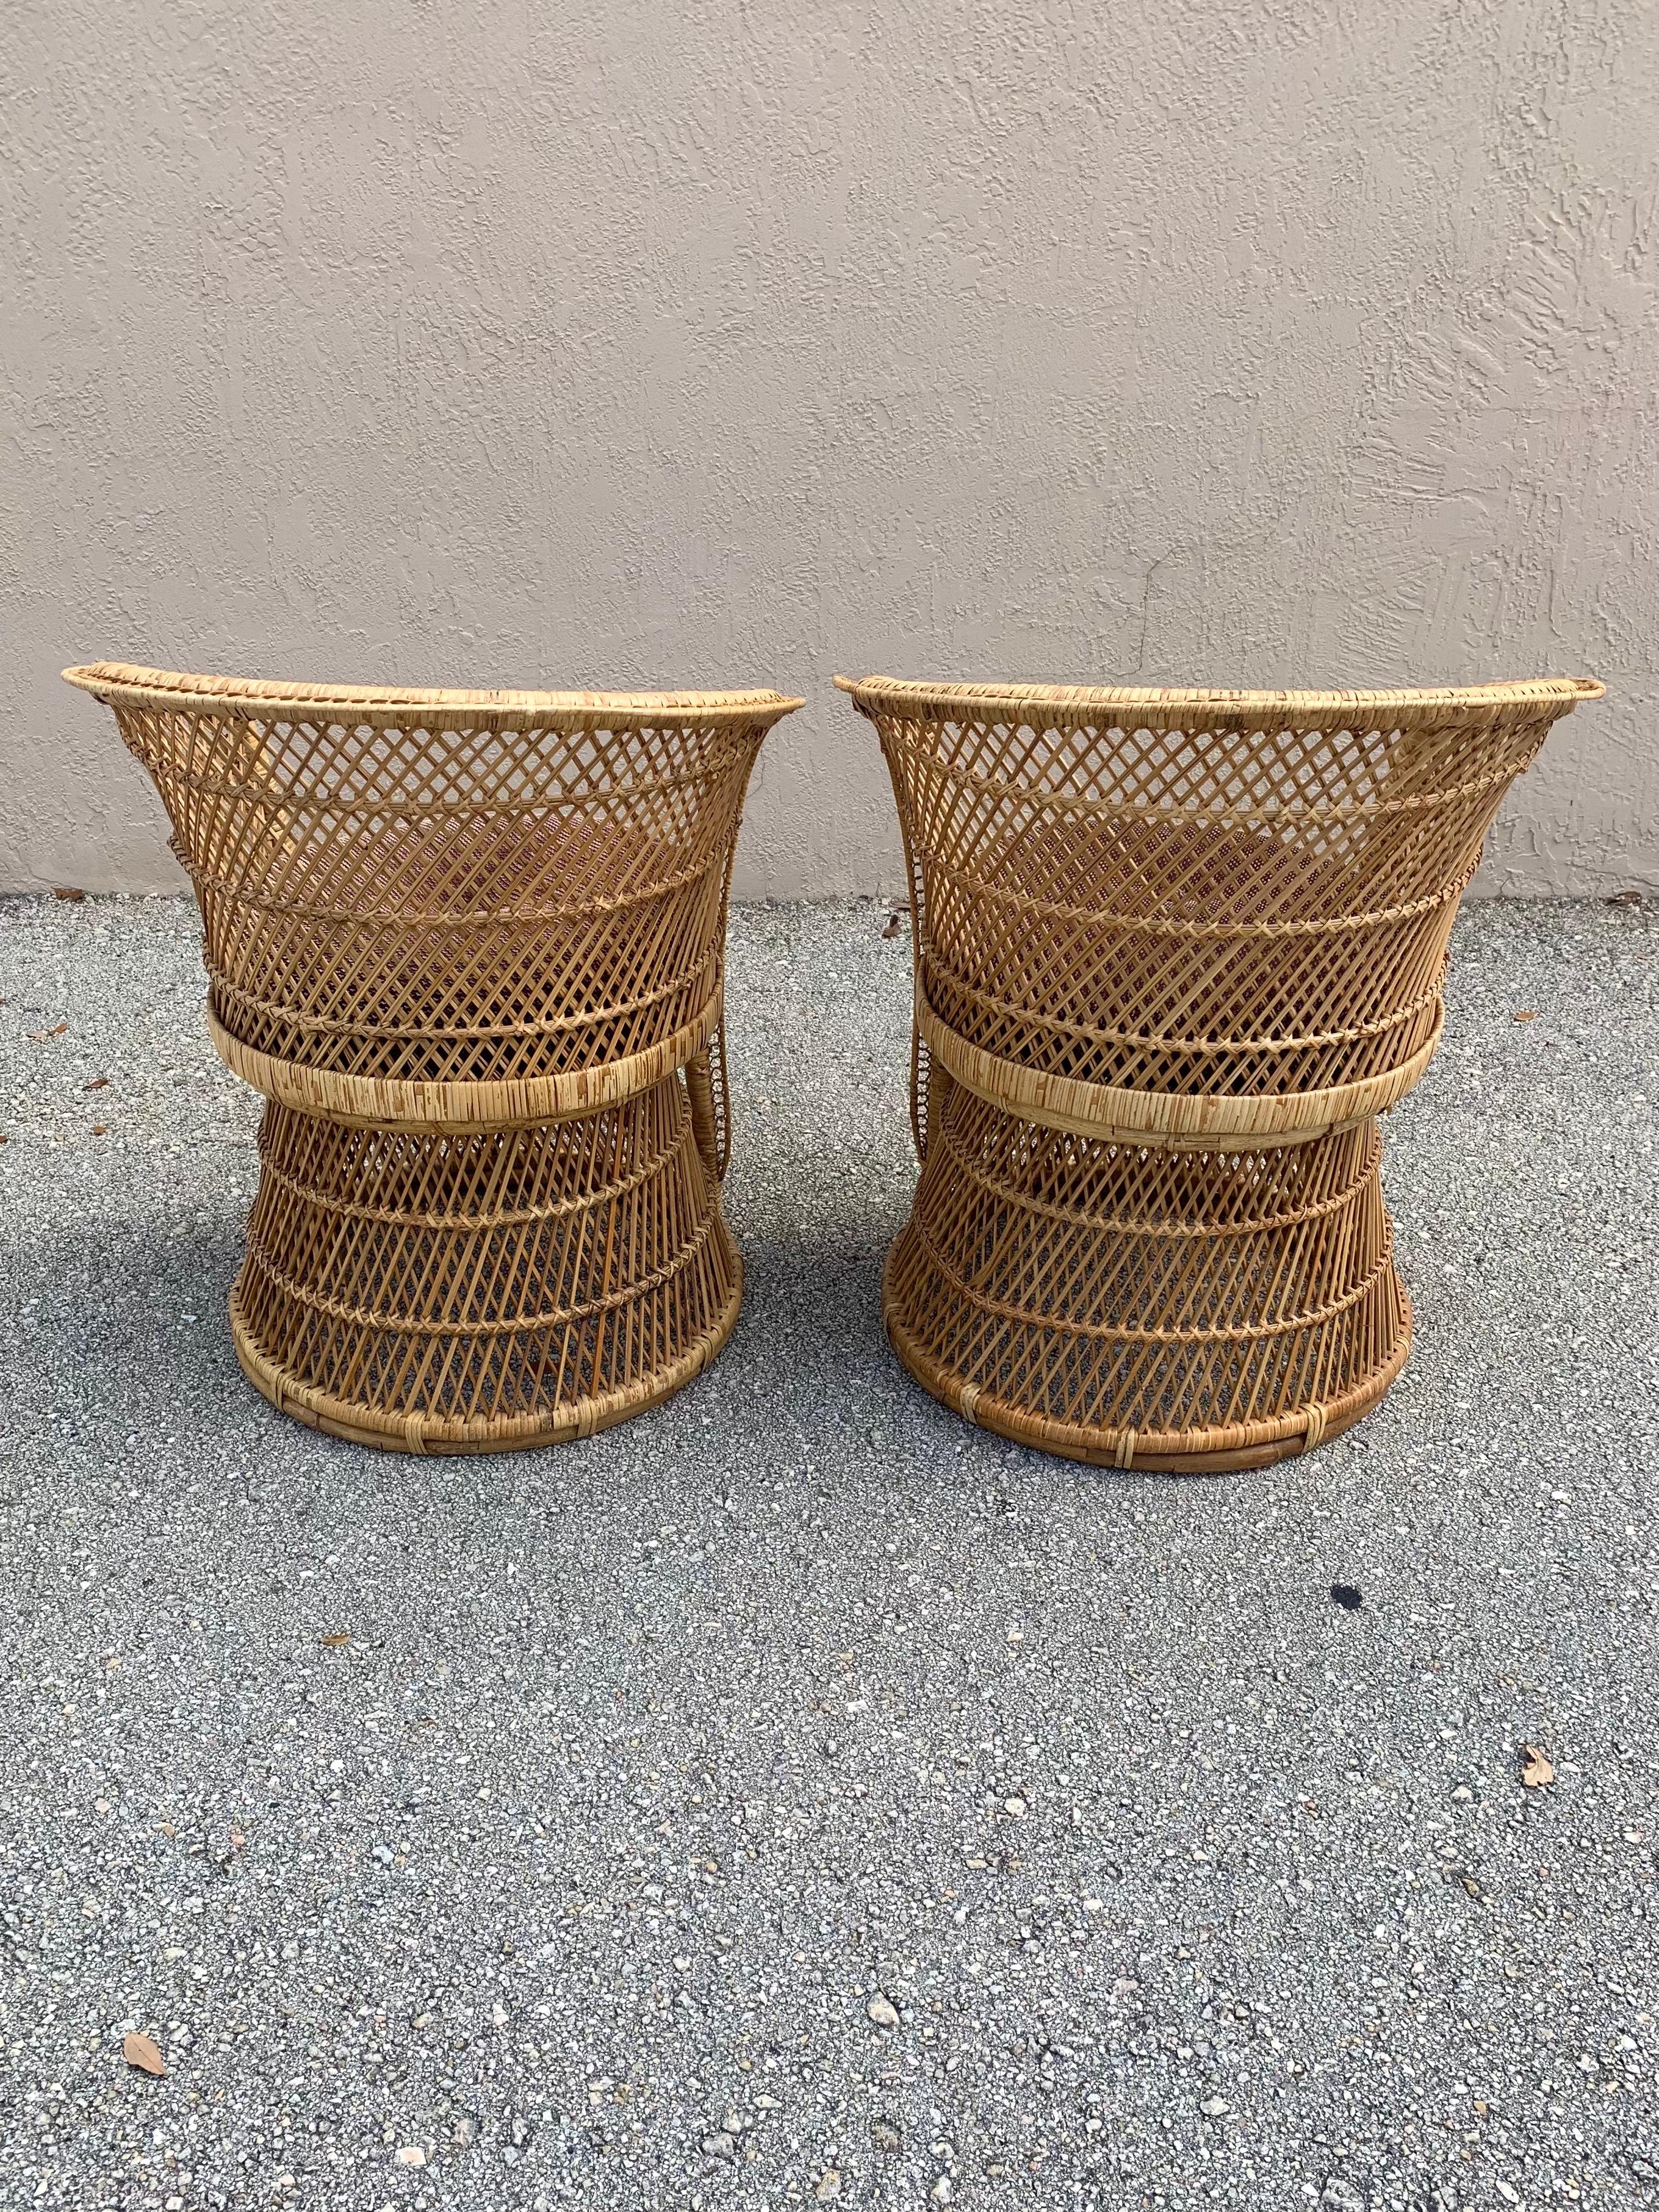 Bamboo Woven Cane Emmanuelle Style Chairs